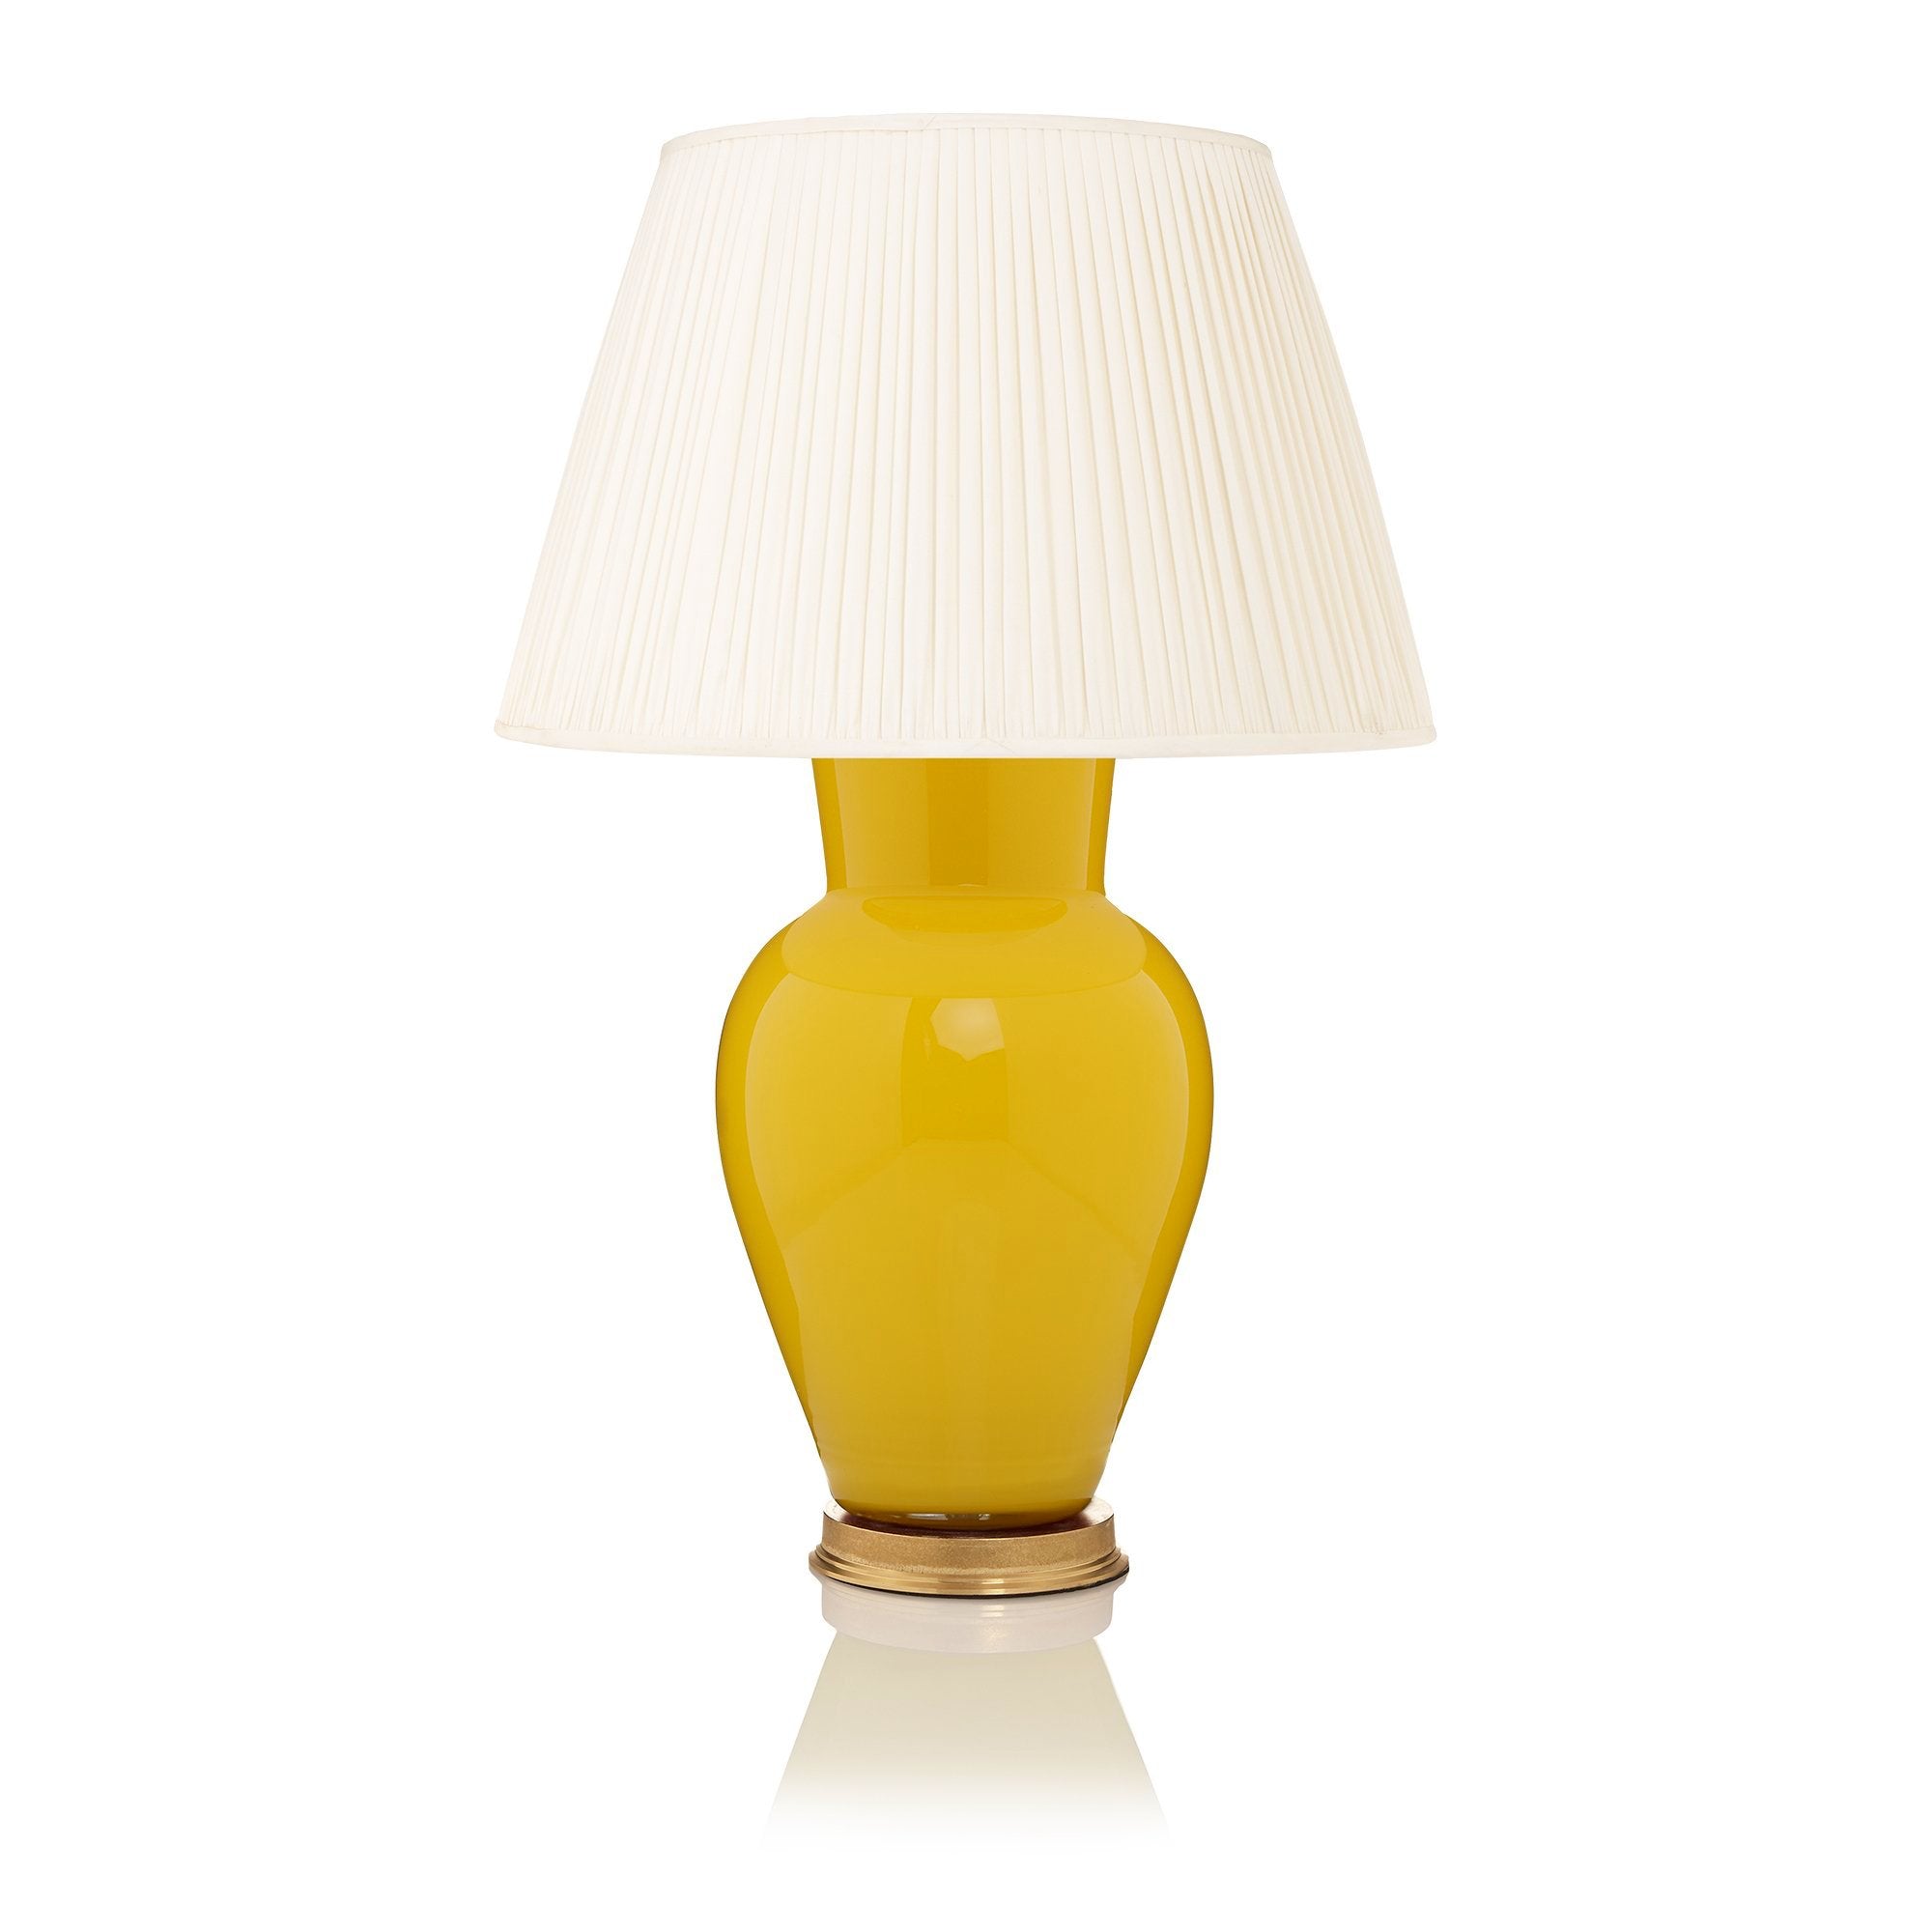 SUNNY SIDE UP LAMP BASE IN LARGE